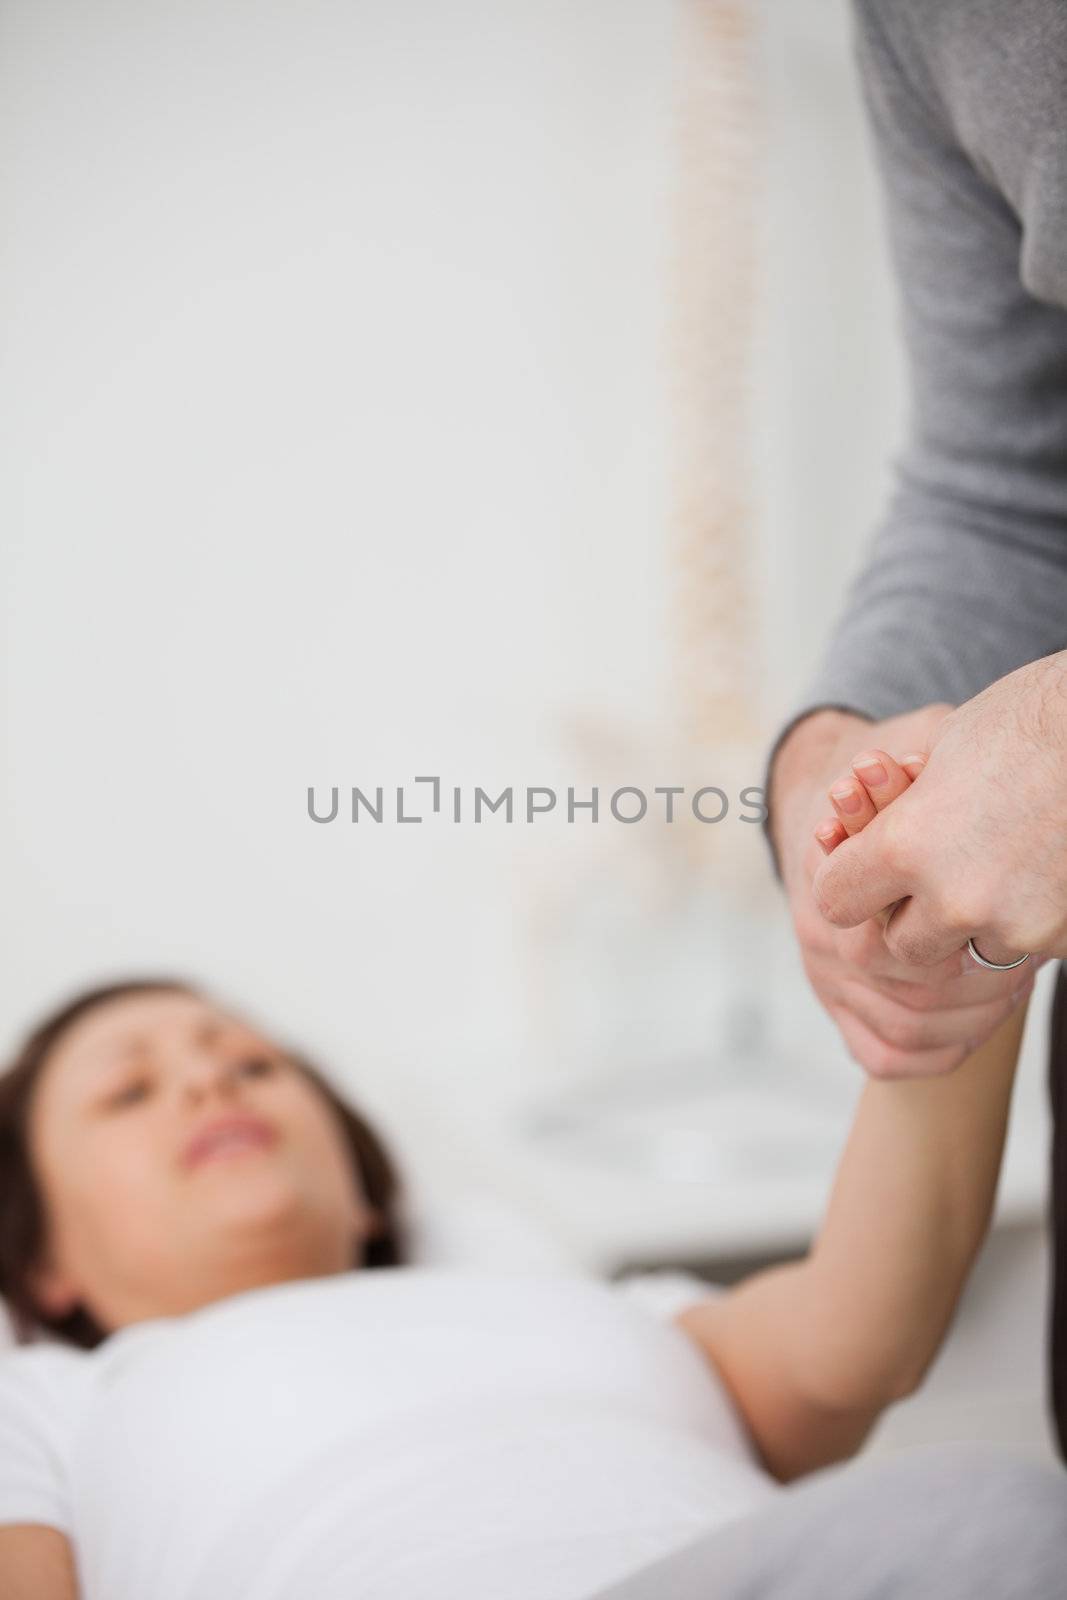 Physiotherapist holding a painful hand in a room